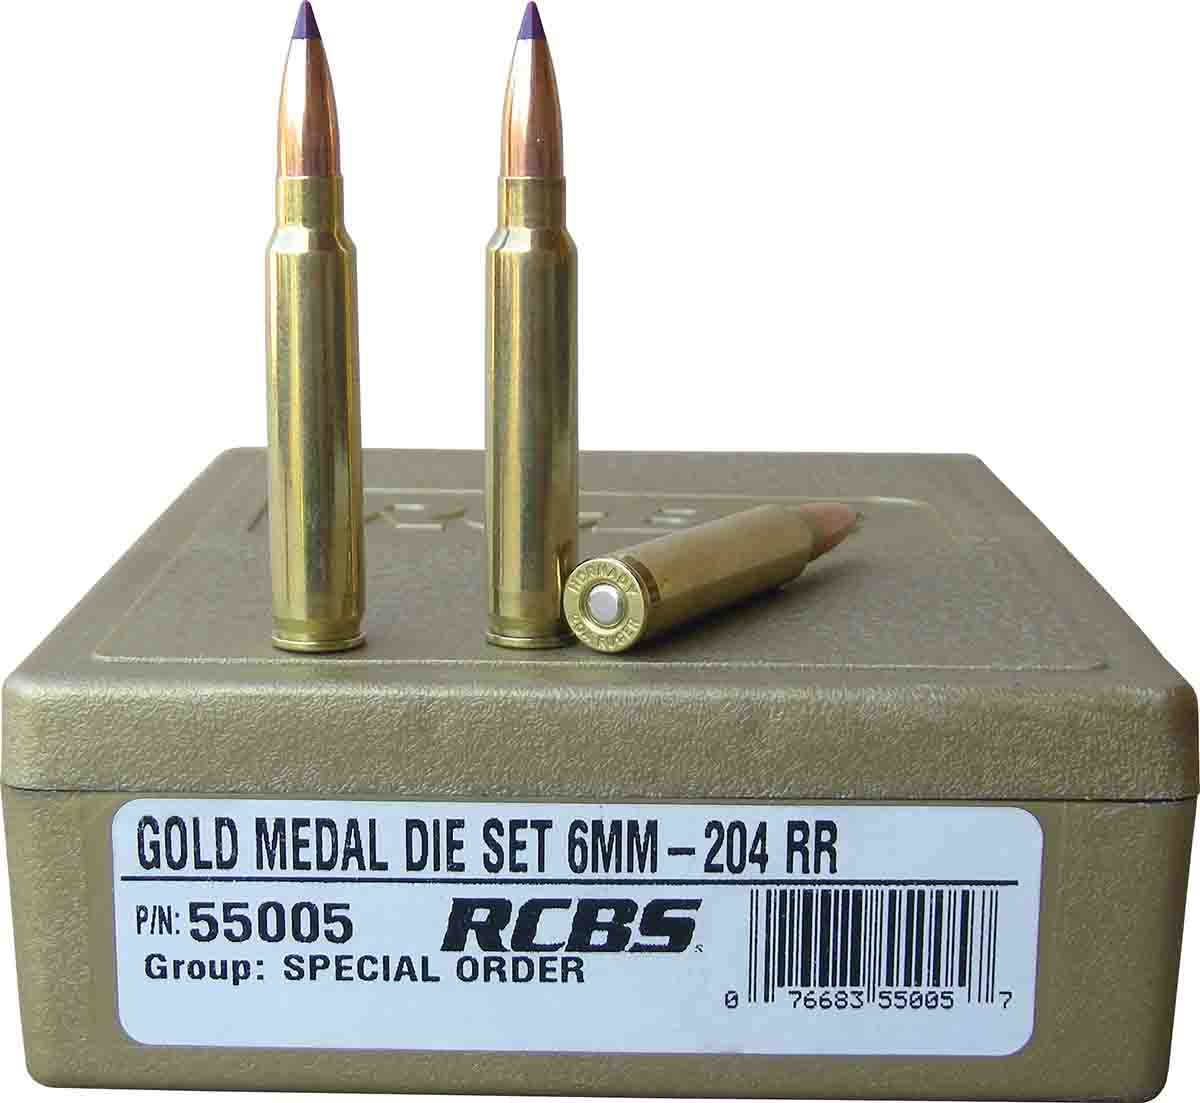 In the 6mm-204 RR, most bullets were seated with an overall cartridge length of around 2.480 inches, necessitating using the rifle and pistol as single shots.